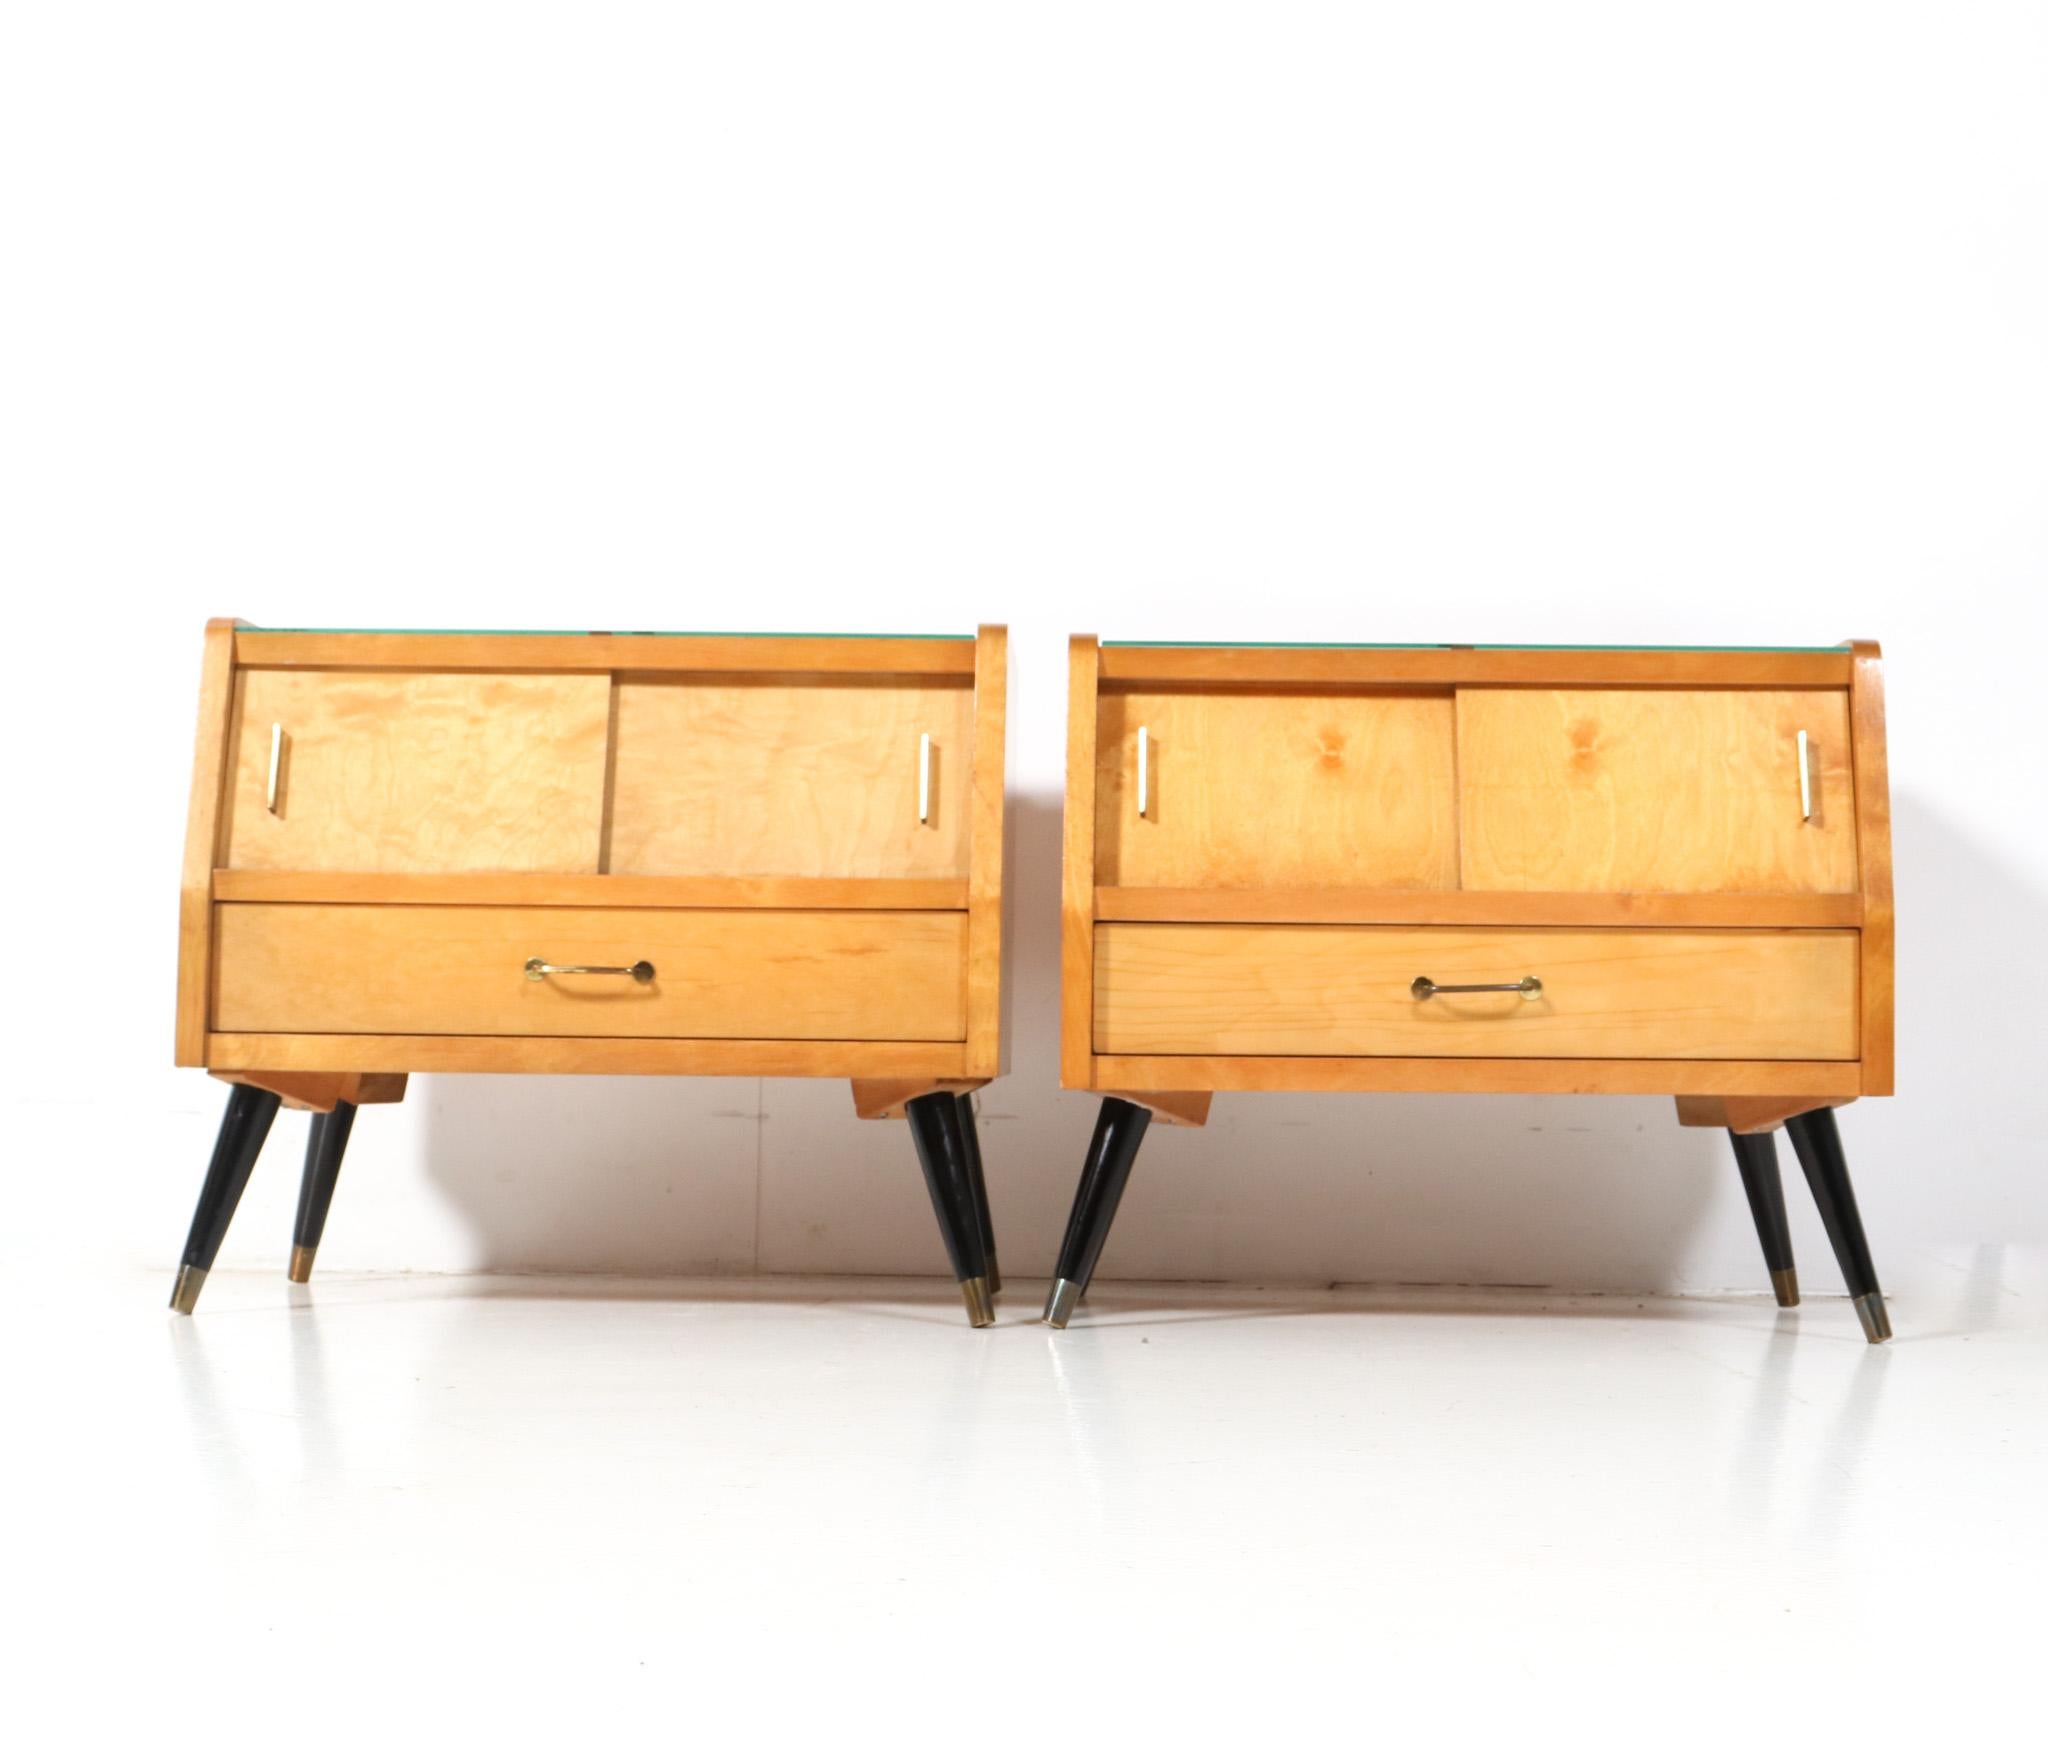 Stunning and rare pair of Mid-Century Modern nightstands or bedside tables.
Striking Italian design from the 1960s.
Solid birch and original veneered birch base on original black lacquered and brass feet.
The sliding doors and drawers have the